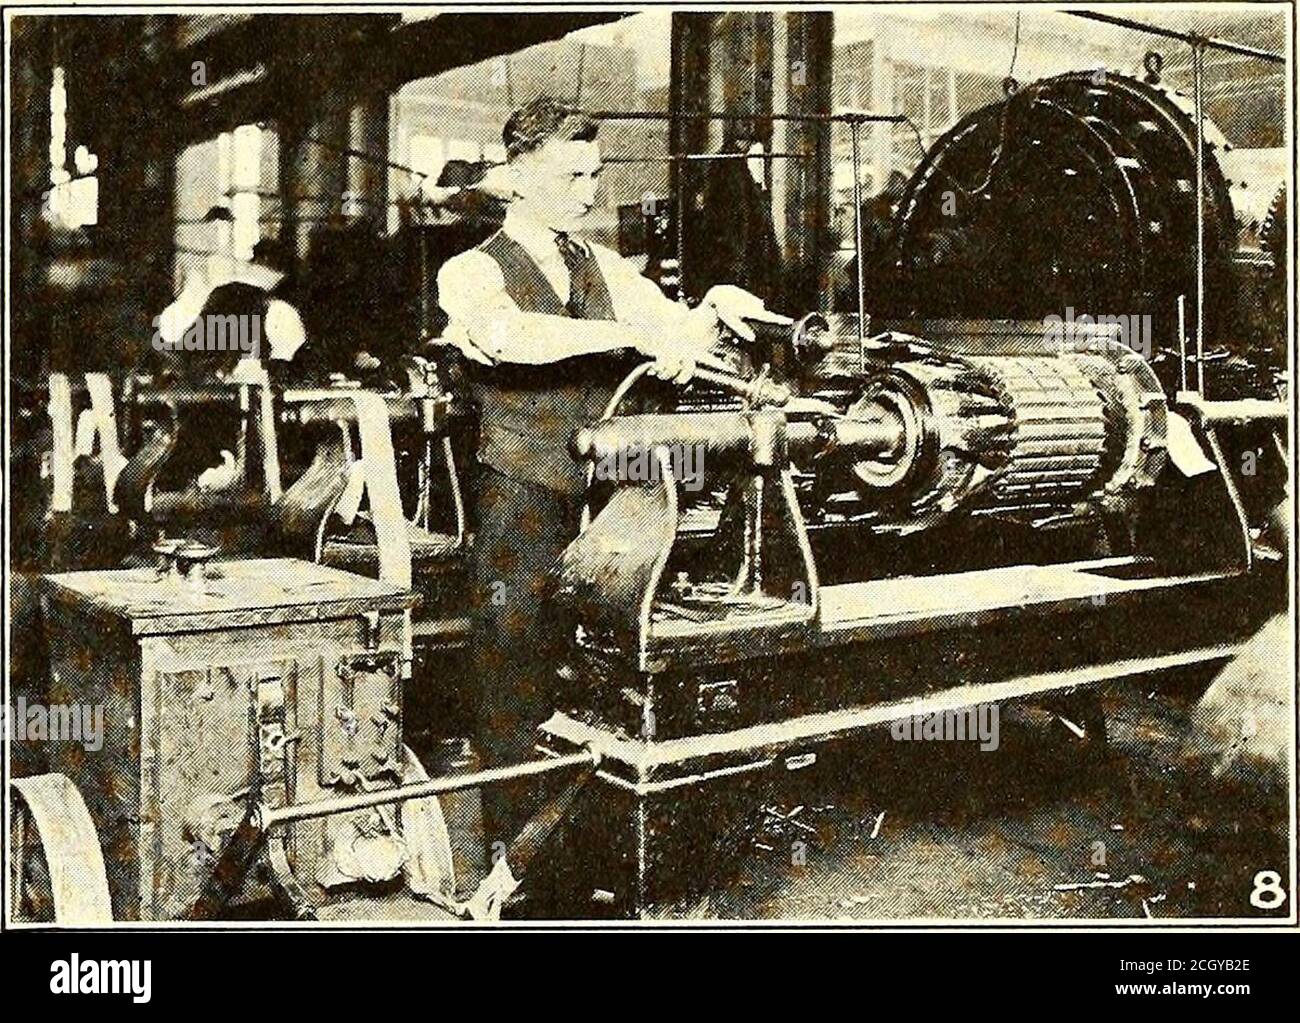 . Electric railway journal . commutator neck. Themica at the front V is protected with insulatingmaterial which receives a special treatment of varnishbefore baking. The commutators are then placed on theassembled core which is mounted in a 60-ton hydraulicpress and forced in place, using a pressure of from 10to 12 tons in the case of a 40-hp. motor. After being wound in metal-reinforced molds andDartly insulated the armature coils are heated in anoven and while hot pressed to a definite size. Theyare then taped, dipped in a high-grade insulating var-nish and baked. The dipping and baking are Stock Photo